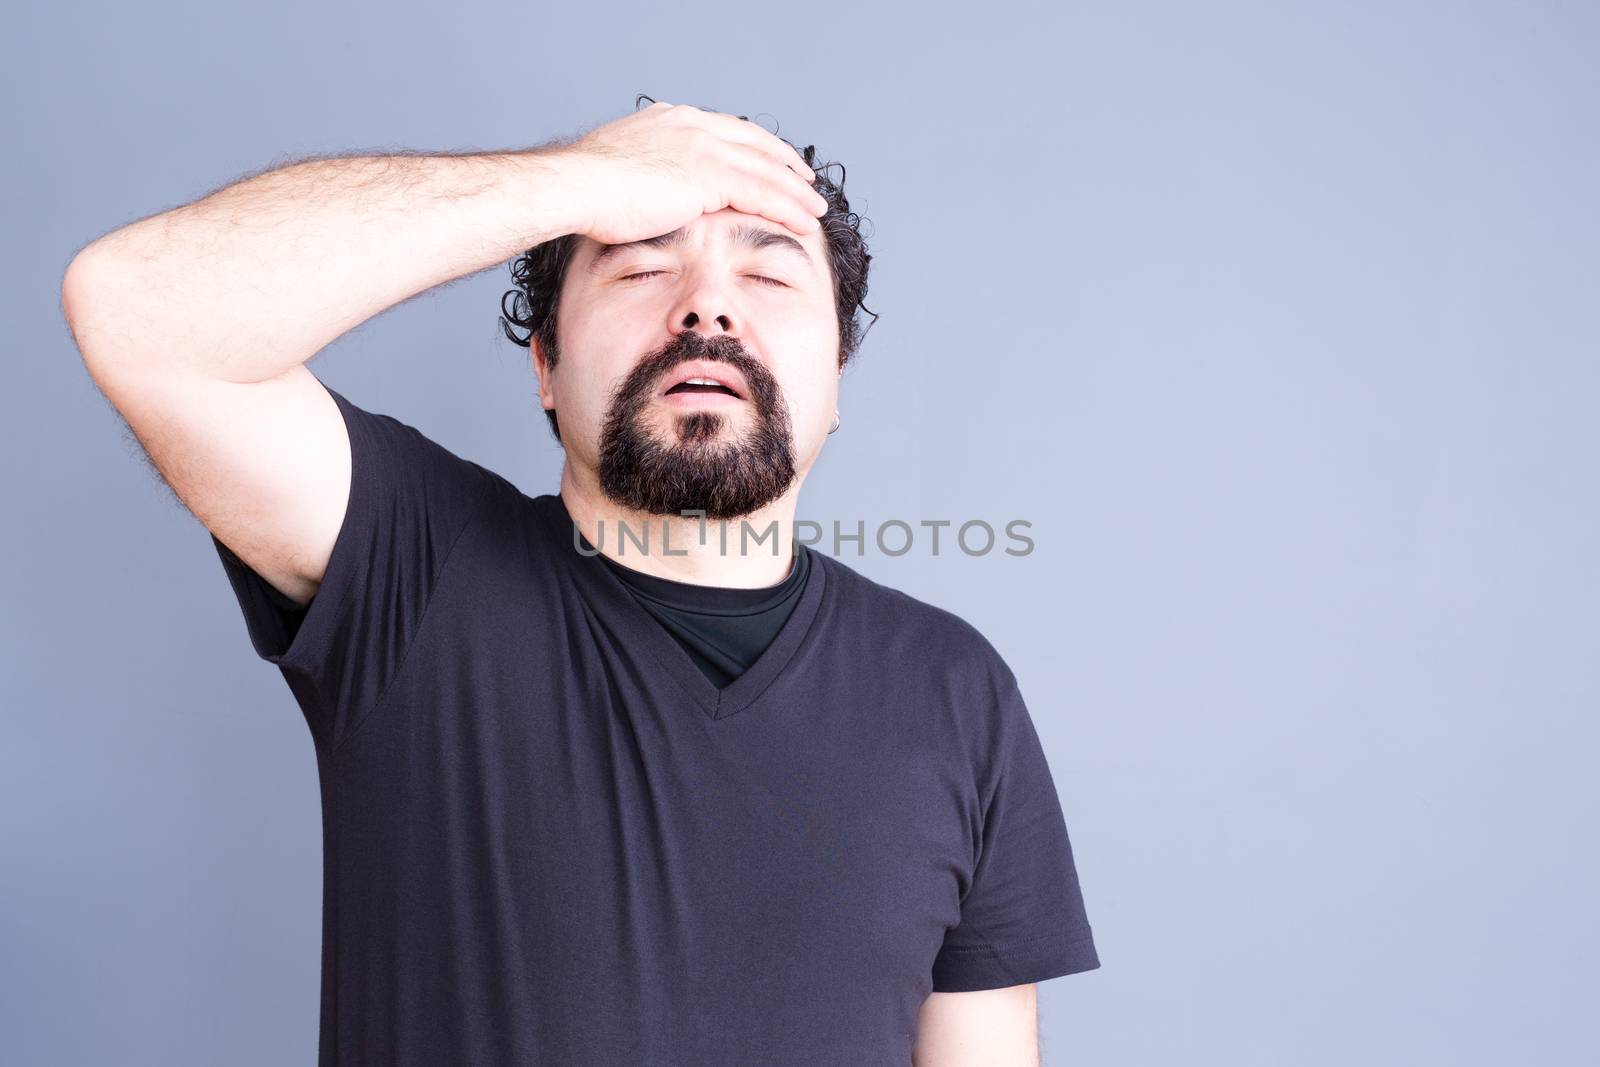 Waist Up of Frustrated Regretful Man with Beard Wearing Dark T-Shirt Holding Head and Hand on Forehead in Studio with Gray Background and Copy Space